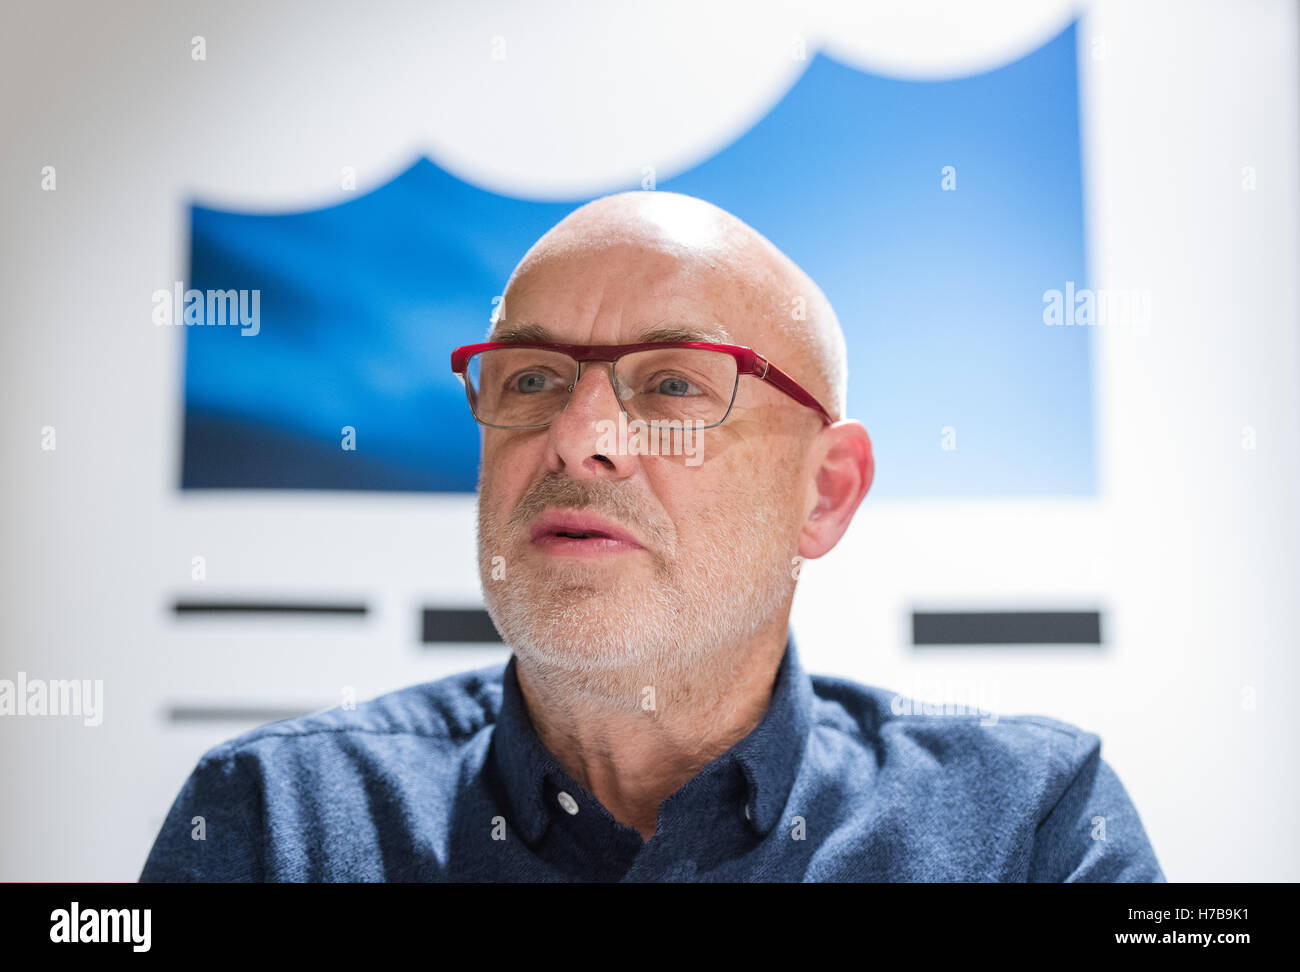 British musician Brian Eno speaking on his installation 'The Ship' during a press conference in the quay studio of the Elbphilharmonie in Hamburg, Germany, 3 November 2016. The installation is open between 4 November and 4 December 2016. PHOTO: DANIEL BOCKWOLDT/dpa Stock Photo